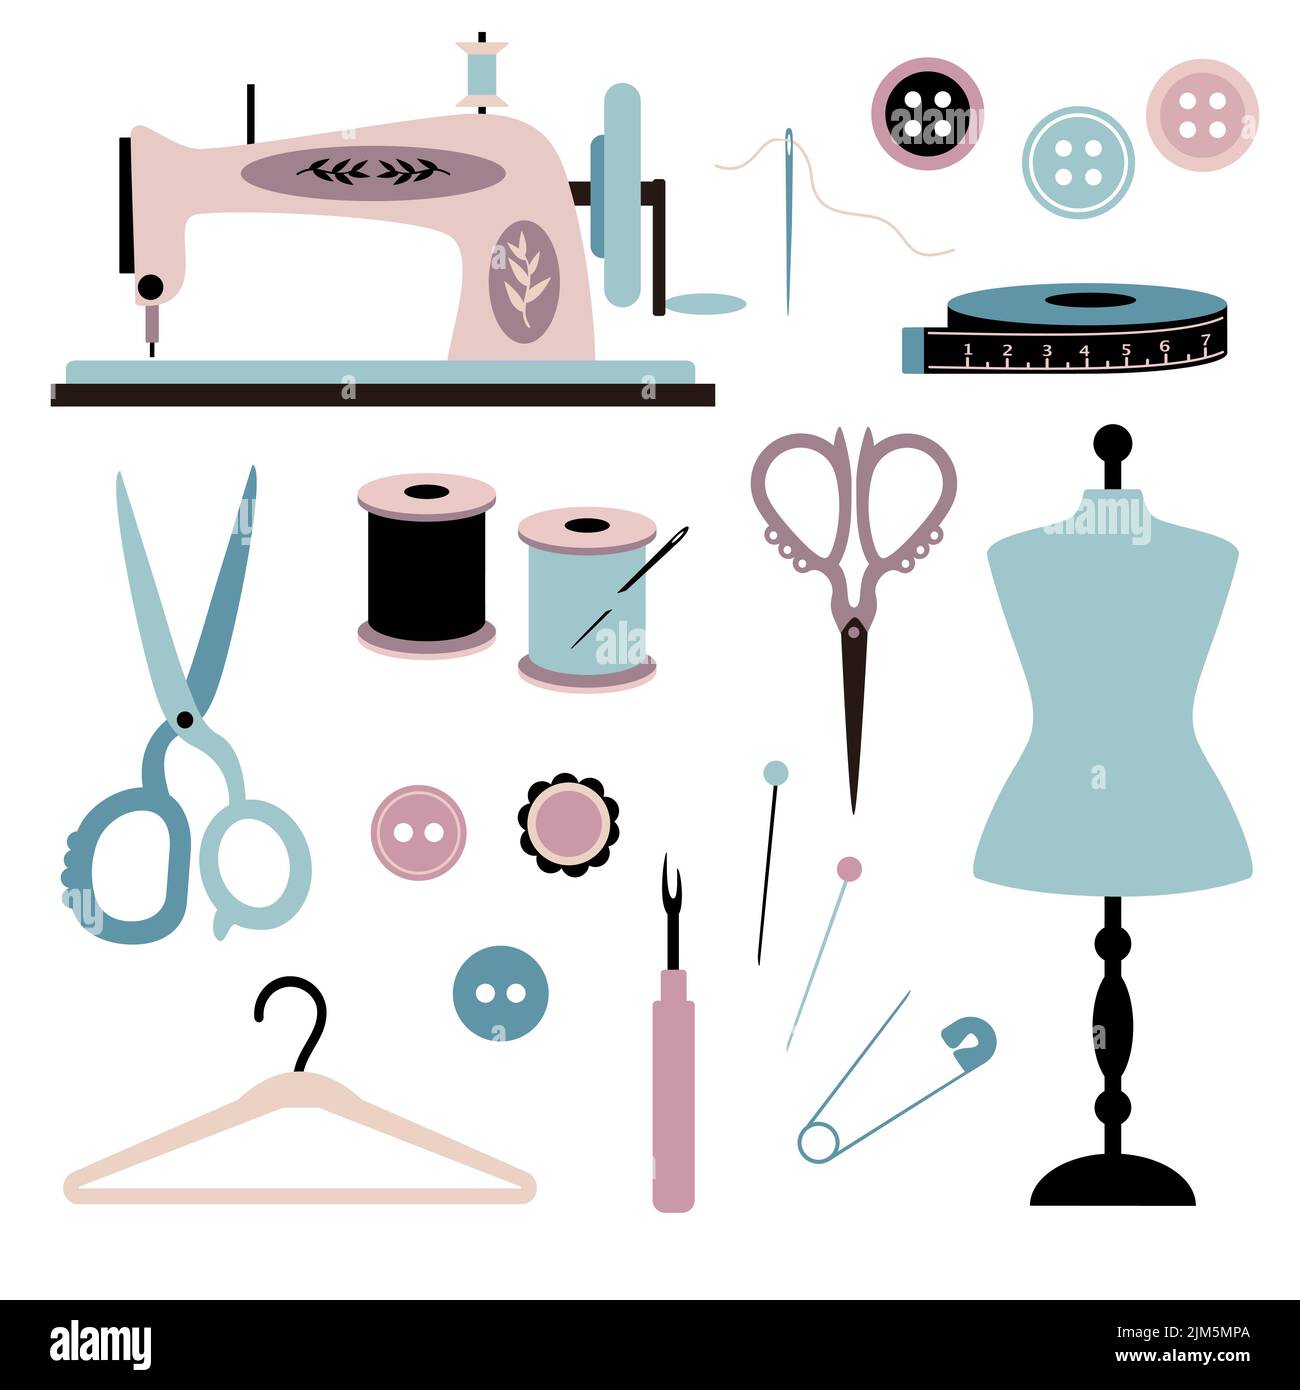 Sewing Stickers Diy Projects Tailoring Needlework Stock Vector